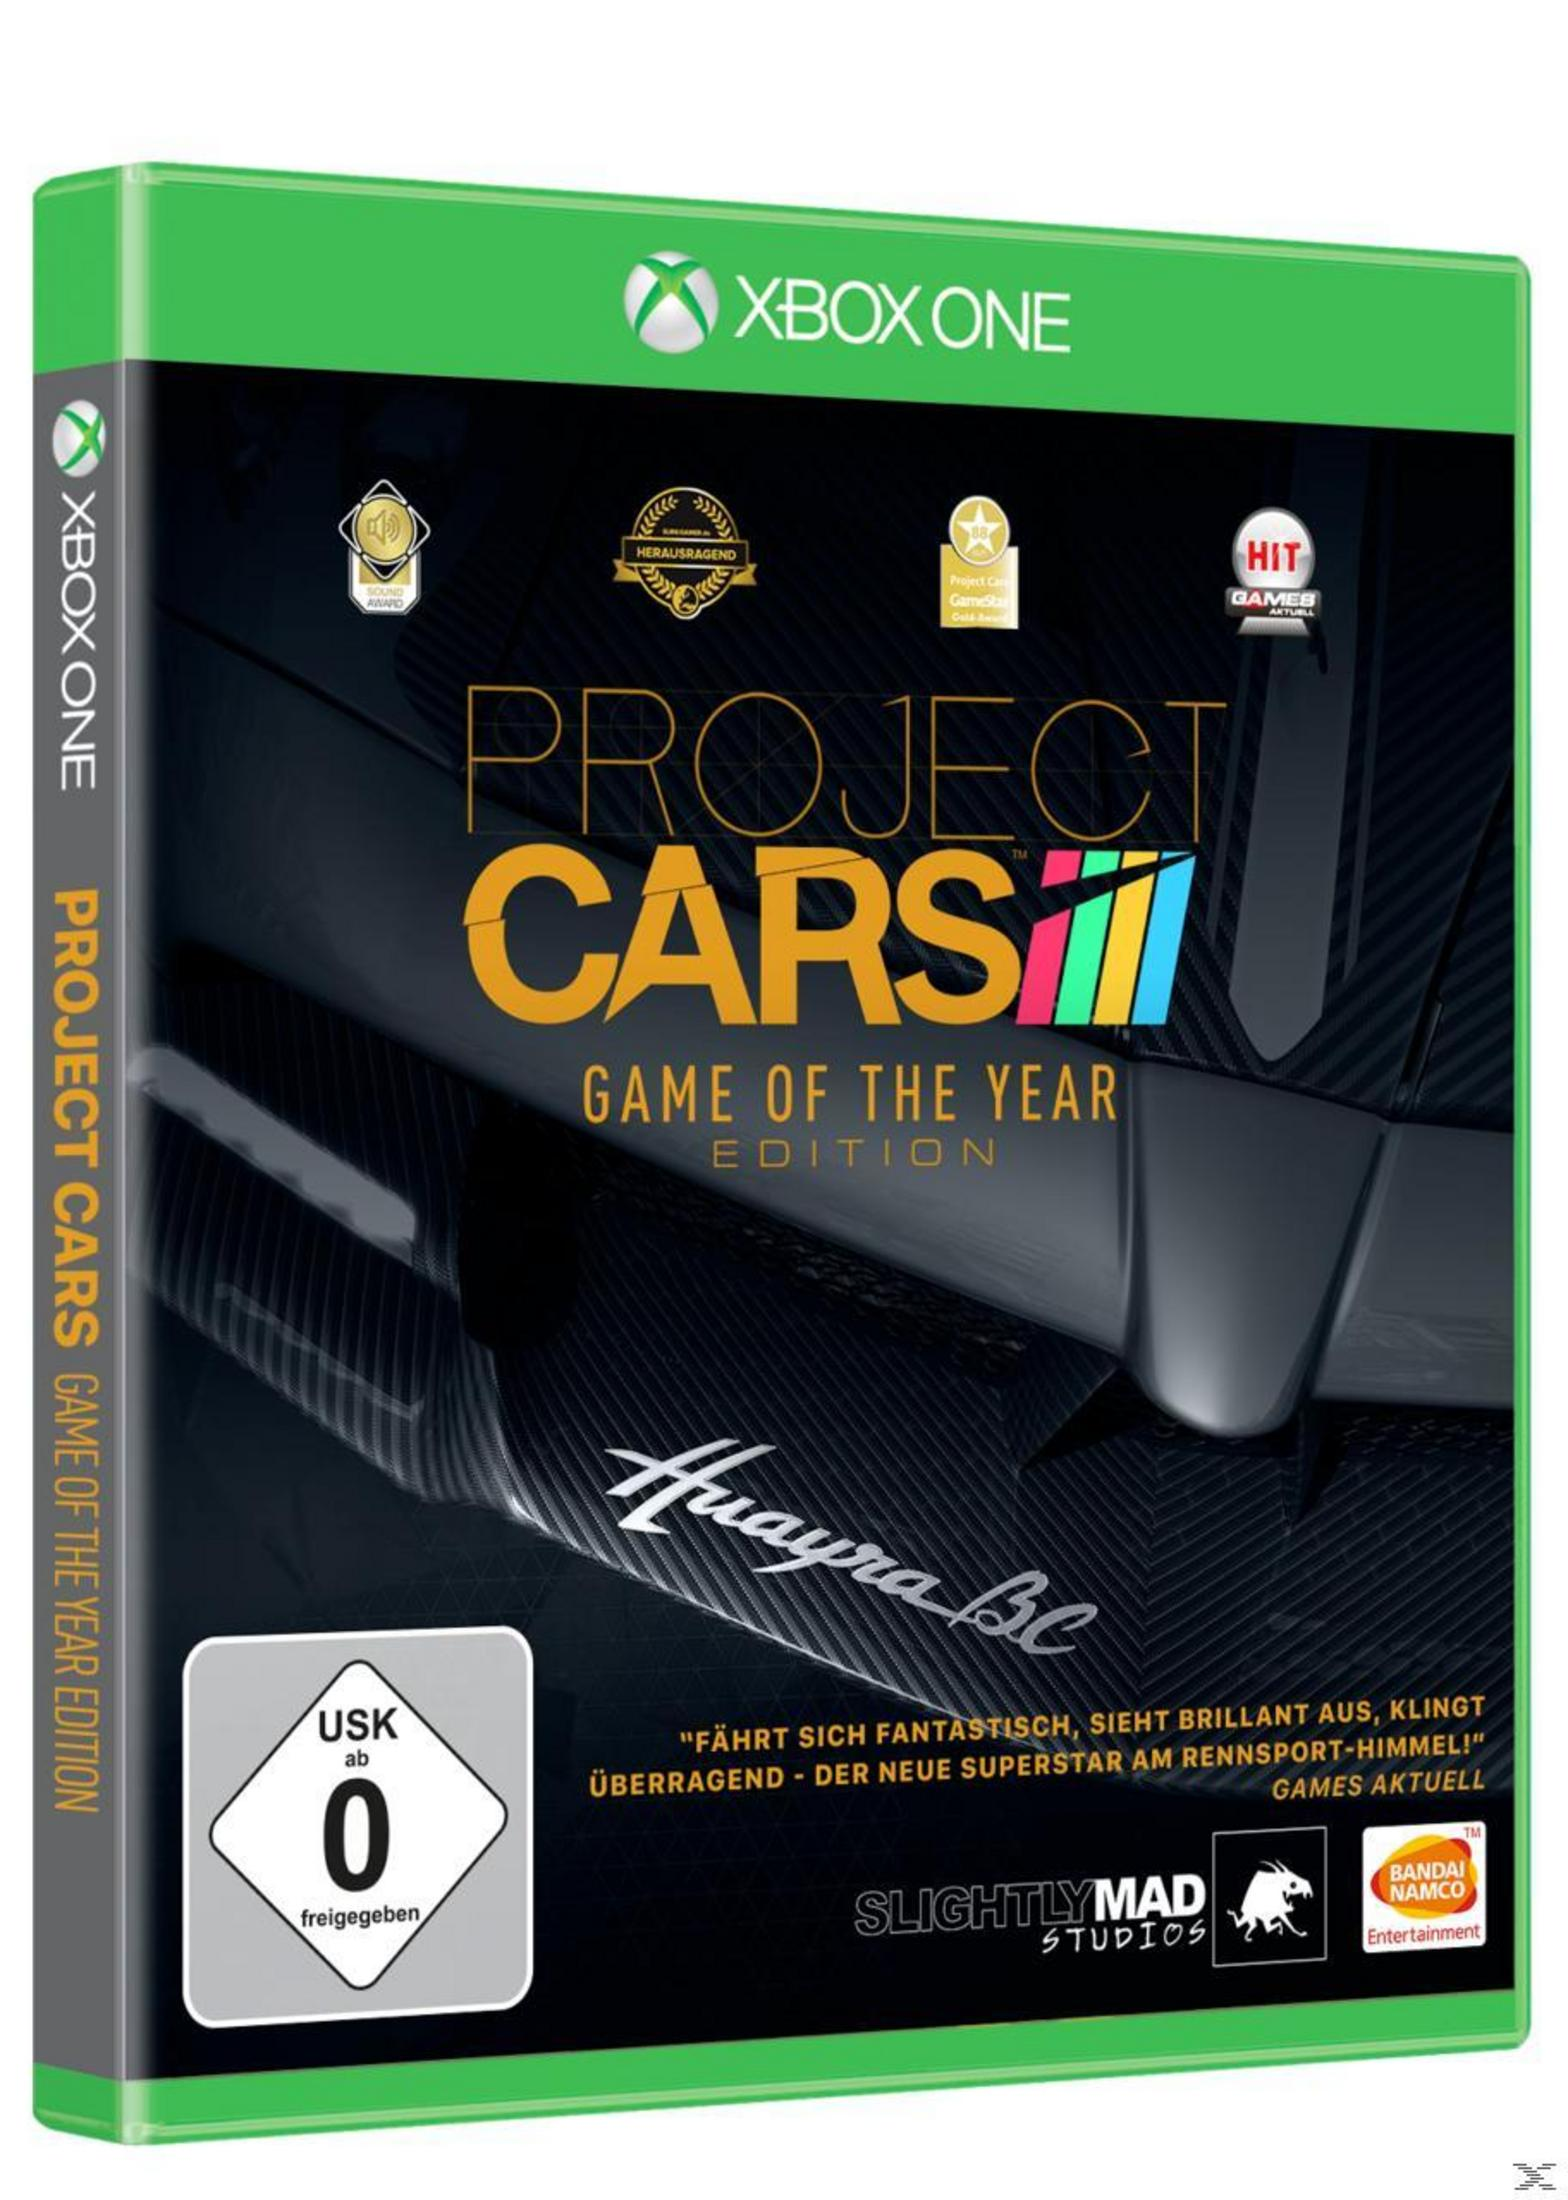 Year Game Cars One] The Project [Xbox Of - - Edition